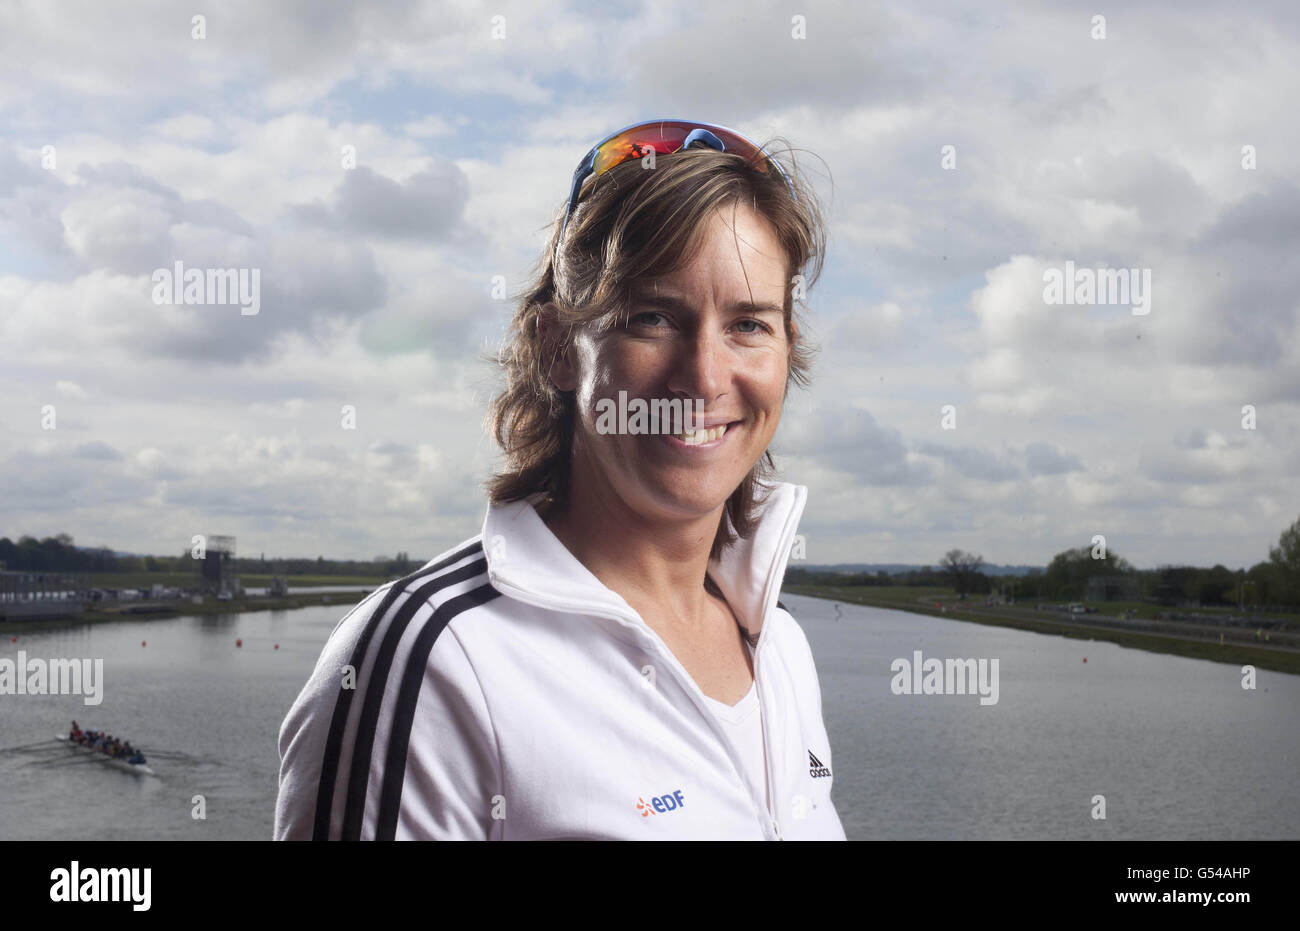 Three-times Olympic rowing silver medalist, world champion and London 2012 hopeful Katherine Grainger MBE, cheered on teams from five East London schools today as they raced in the EDF Community Rowing Challenge at Eton College Rowing Centre, Dorney Lake. Stock Photo